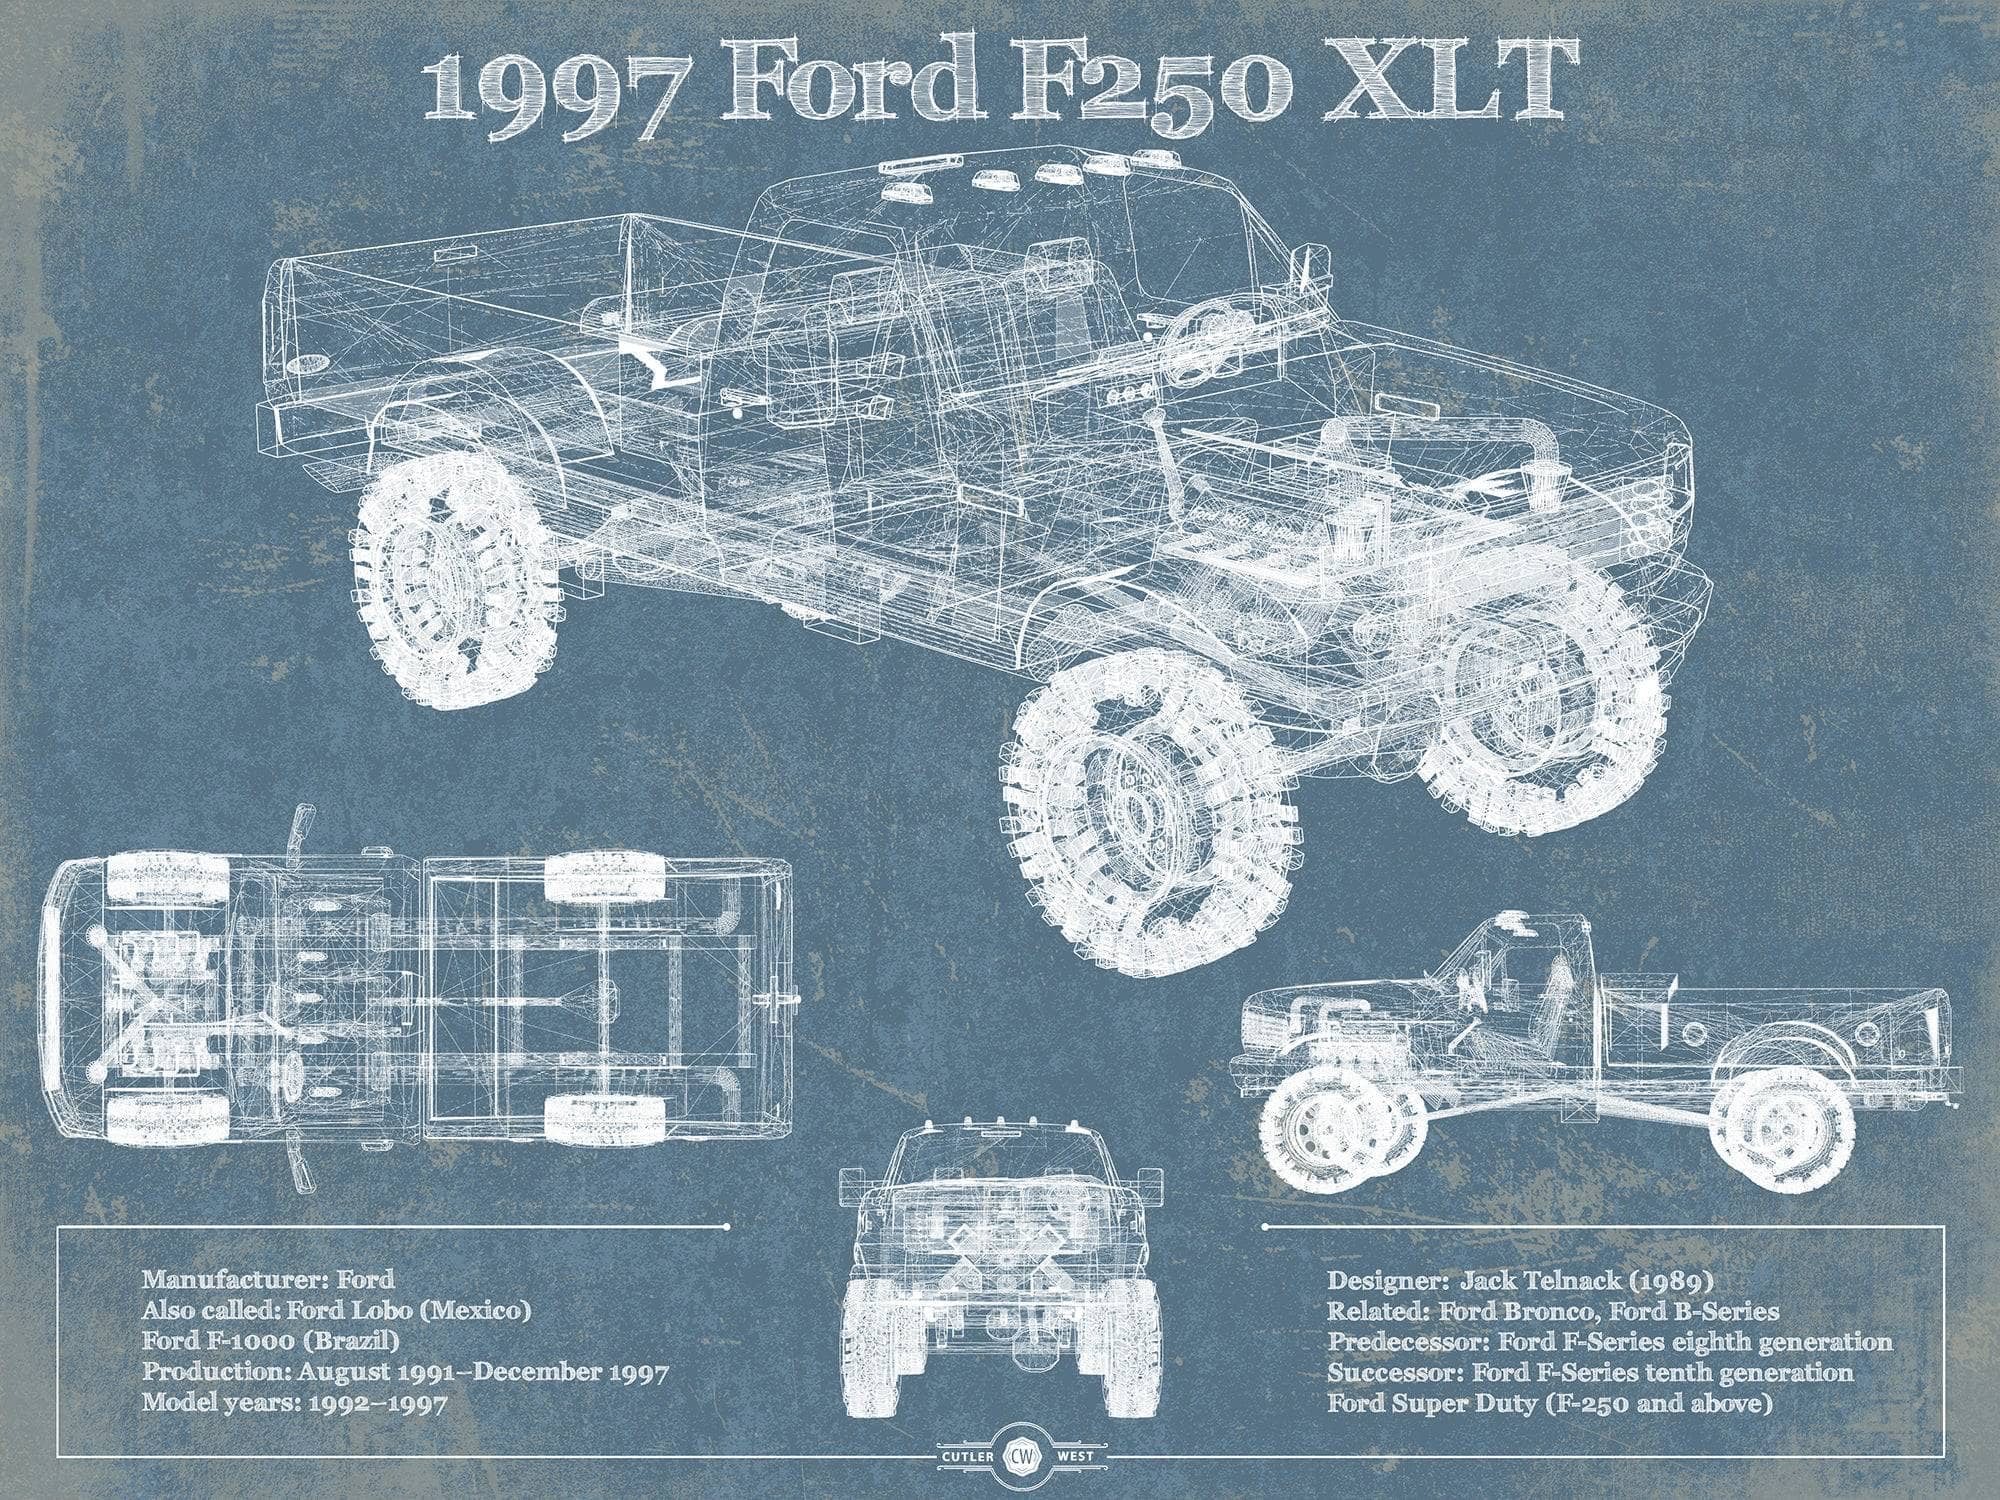 Cutler West Ford Collection 14" x 11" / Unframed 1997 Ford F250 XLT Vintage Blueprint Auto Print 933311047_39431